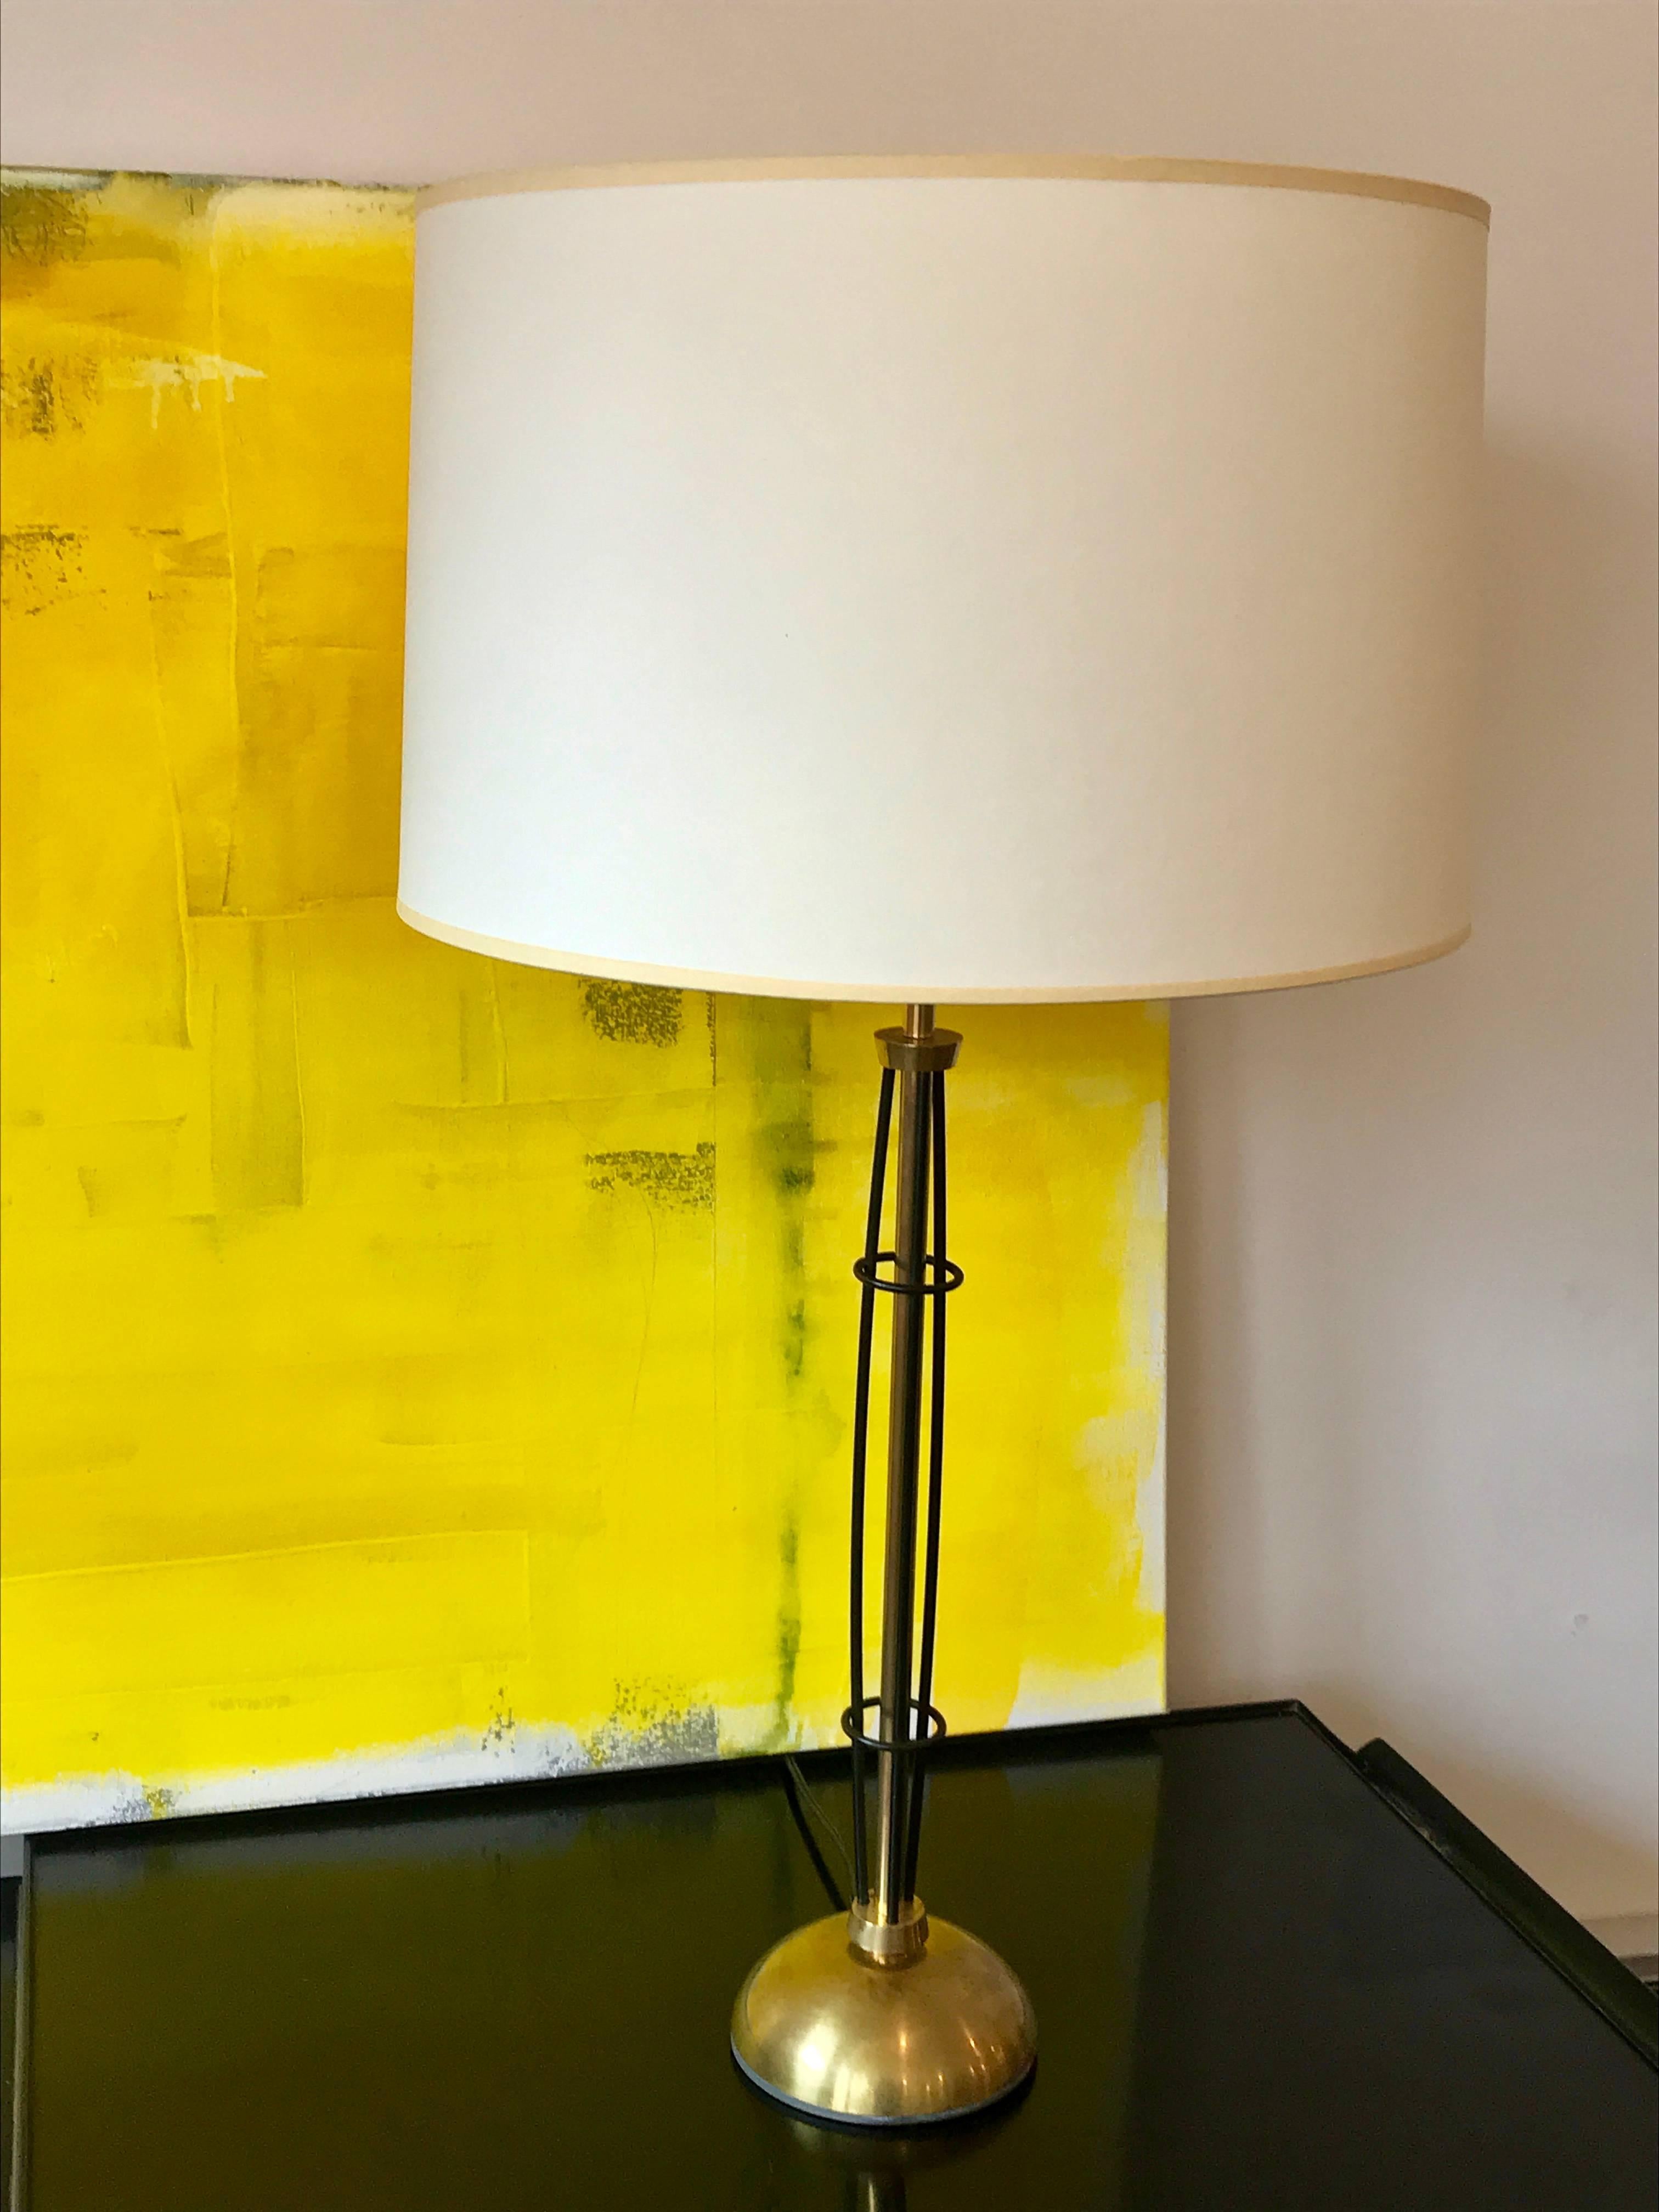 Very cool brass and wrought iron table lamp similar to the designs by Tony Paul, 1950s.

Rewired and professionally cleaned. Shade not included.